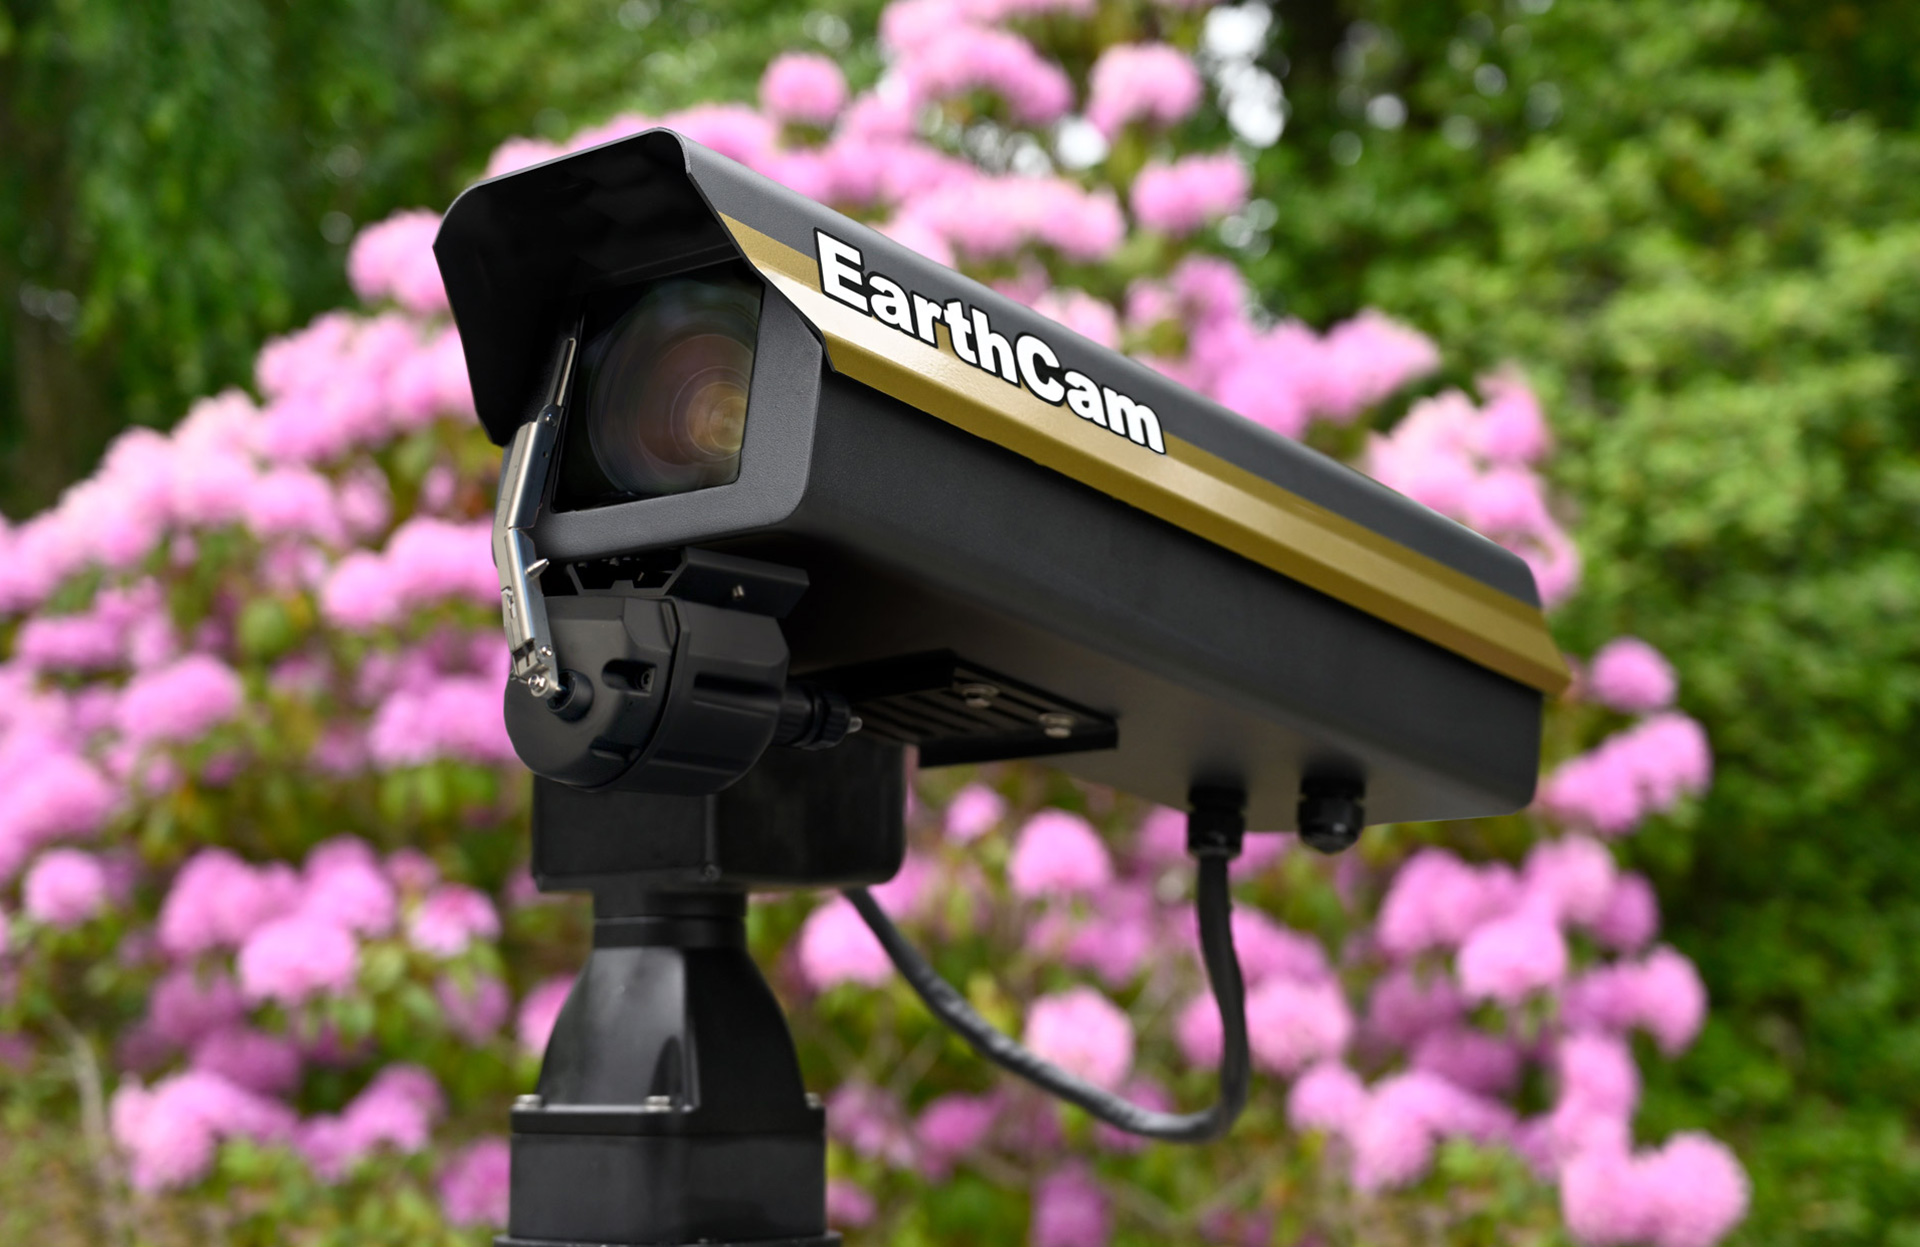 61 MegapixelCam Ultra-high resolution fixed position time-lapse camera